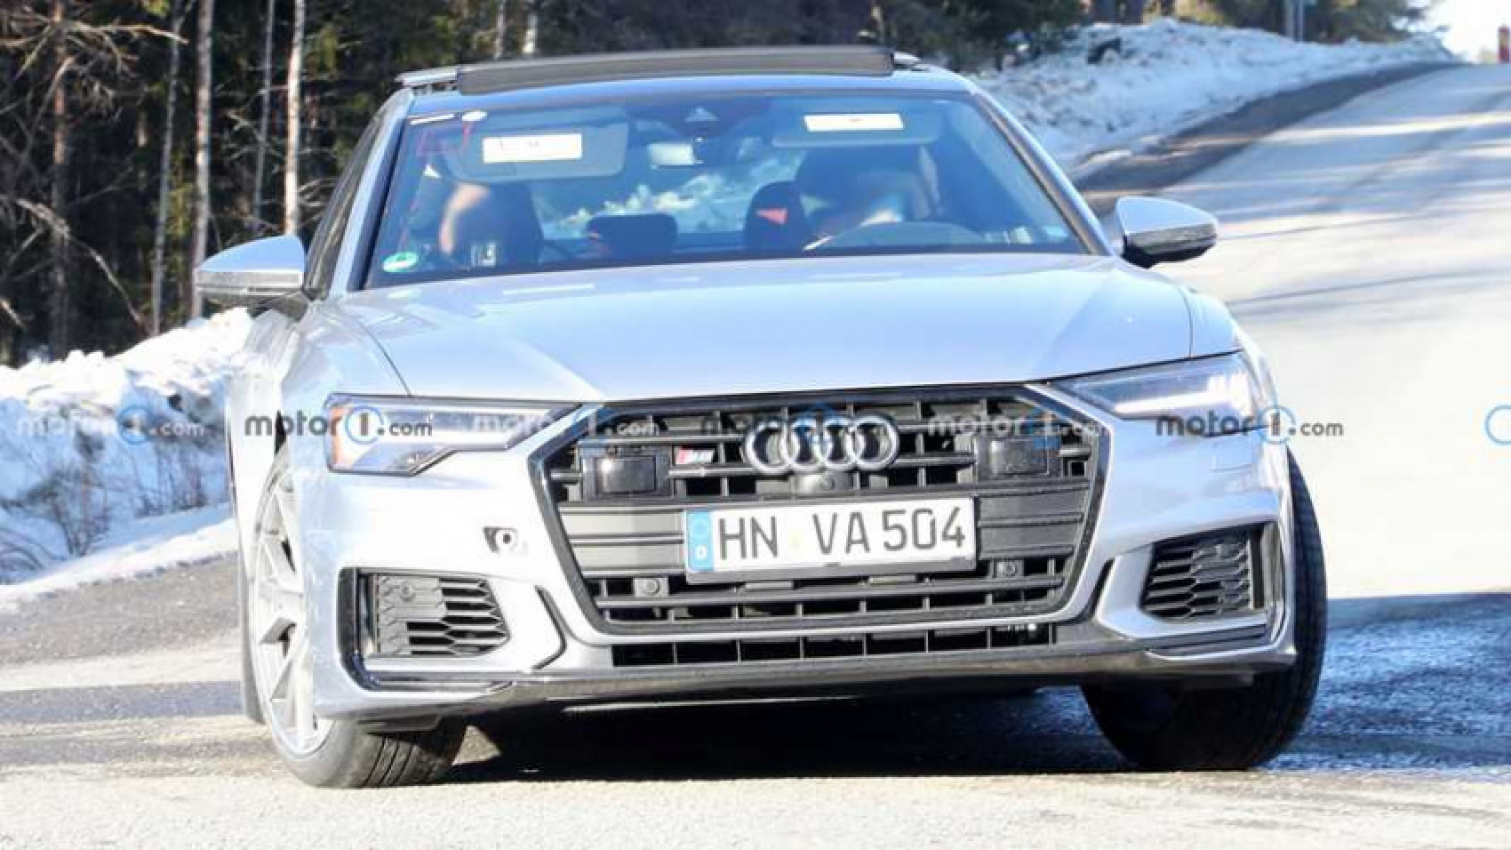 audi, autos, cars, audi s6, audi s6 test mule spied with loud, real exhaust beneath fake tips